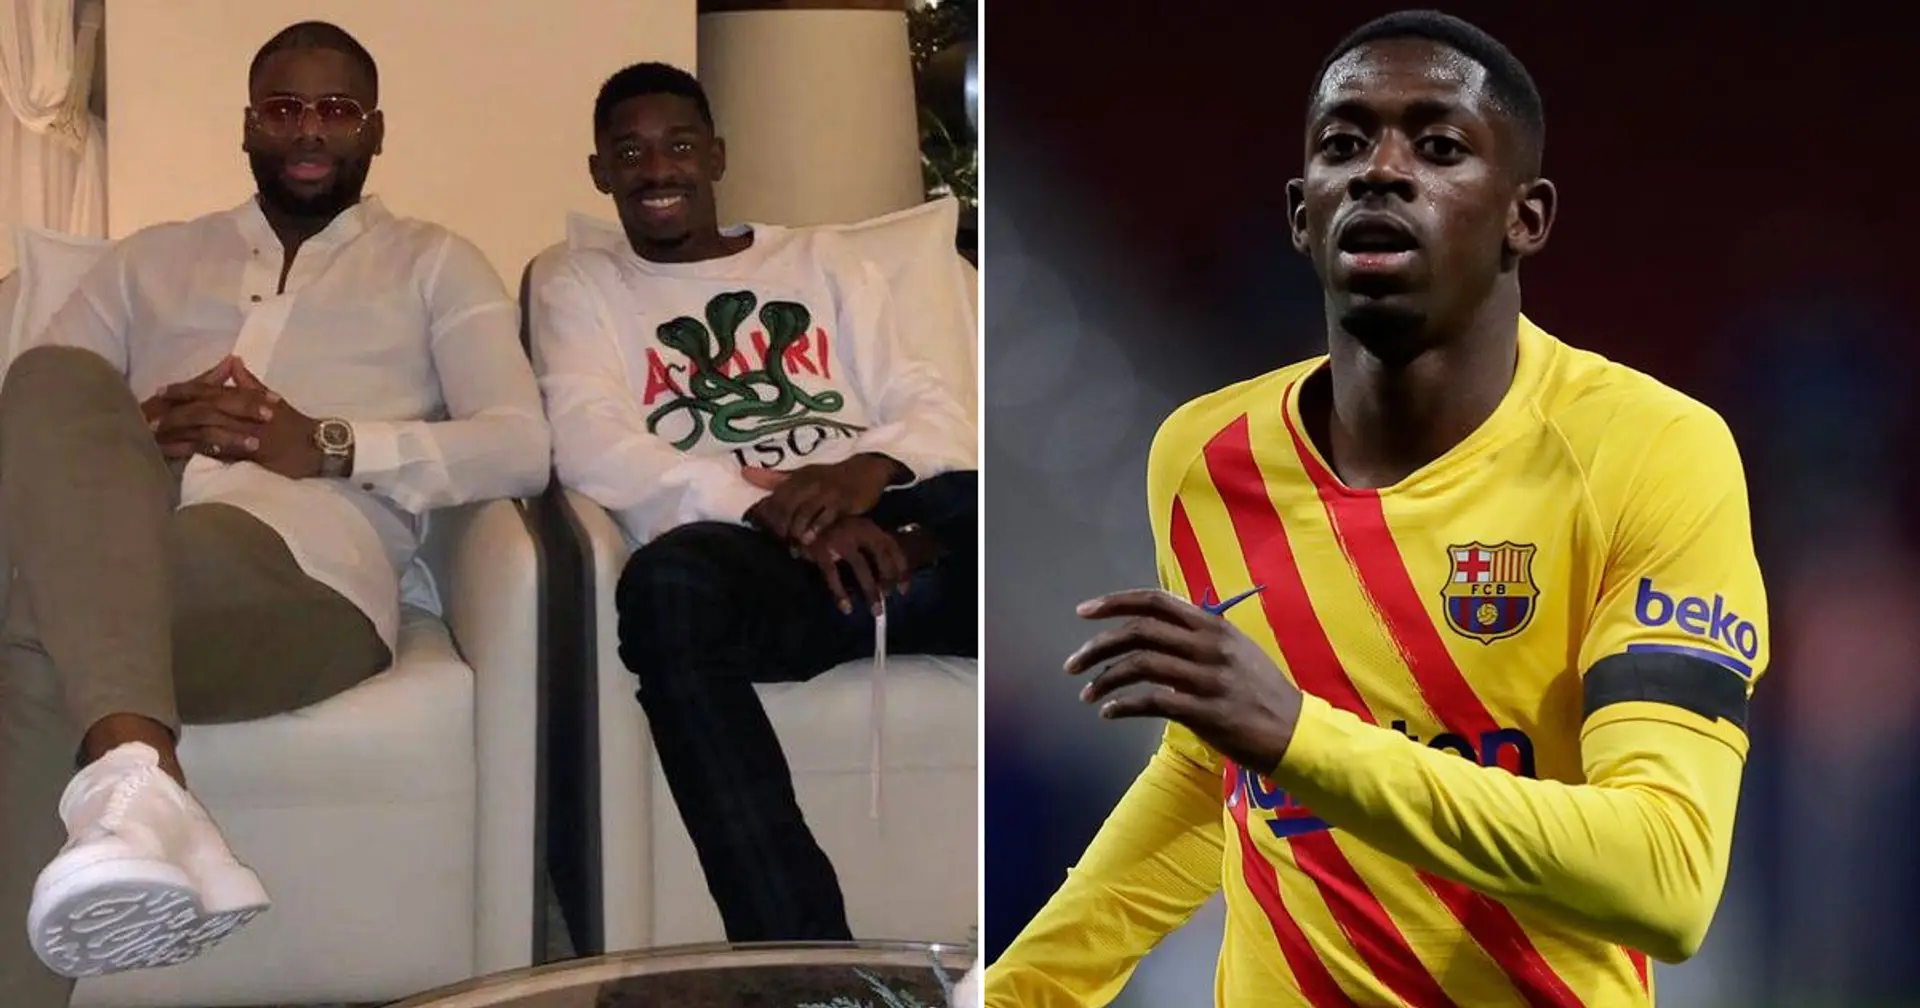 'It's not only a question of money': Dembele's agent blasts Barca over poor management of striker